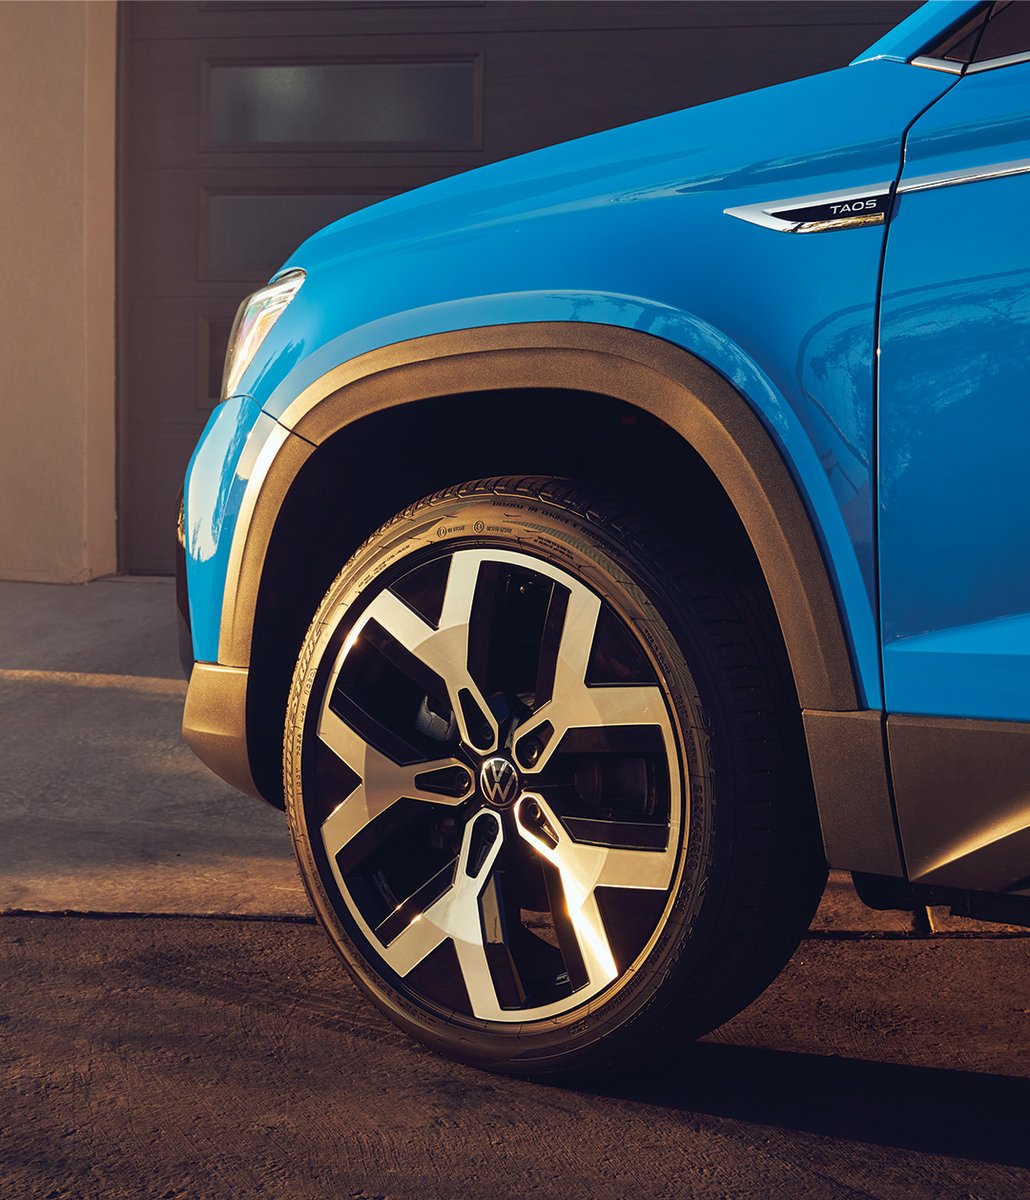 Rolling into the week with style! 😎 Check out the sleek wheels on the Volkswagen Taos, ready to conquer any road with a touch of sophistication. 🌟
🔗  bit.ly/3OgzG3I
.
.
.
#VolkswagenOfSmithtown #VW #VolkswagenVehicles #NewVolkswagen #Taos #Automotive #TaosVolkswagen